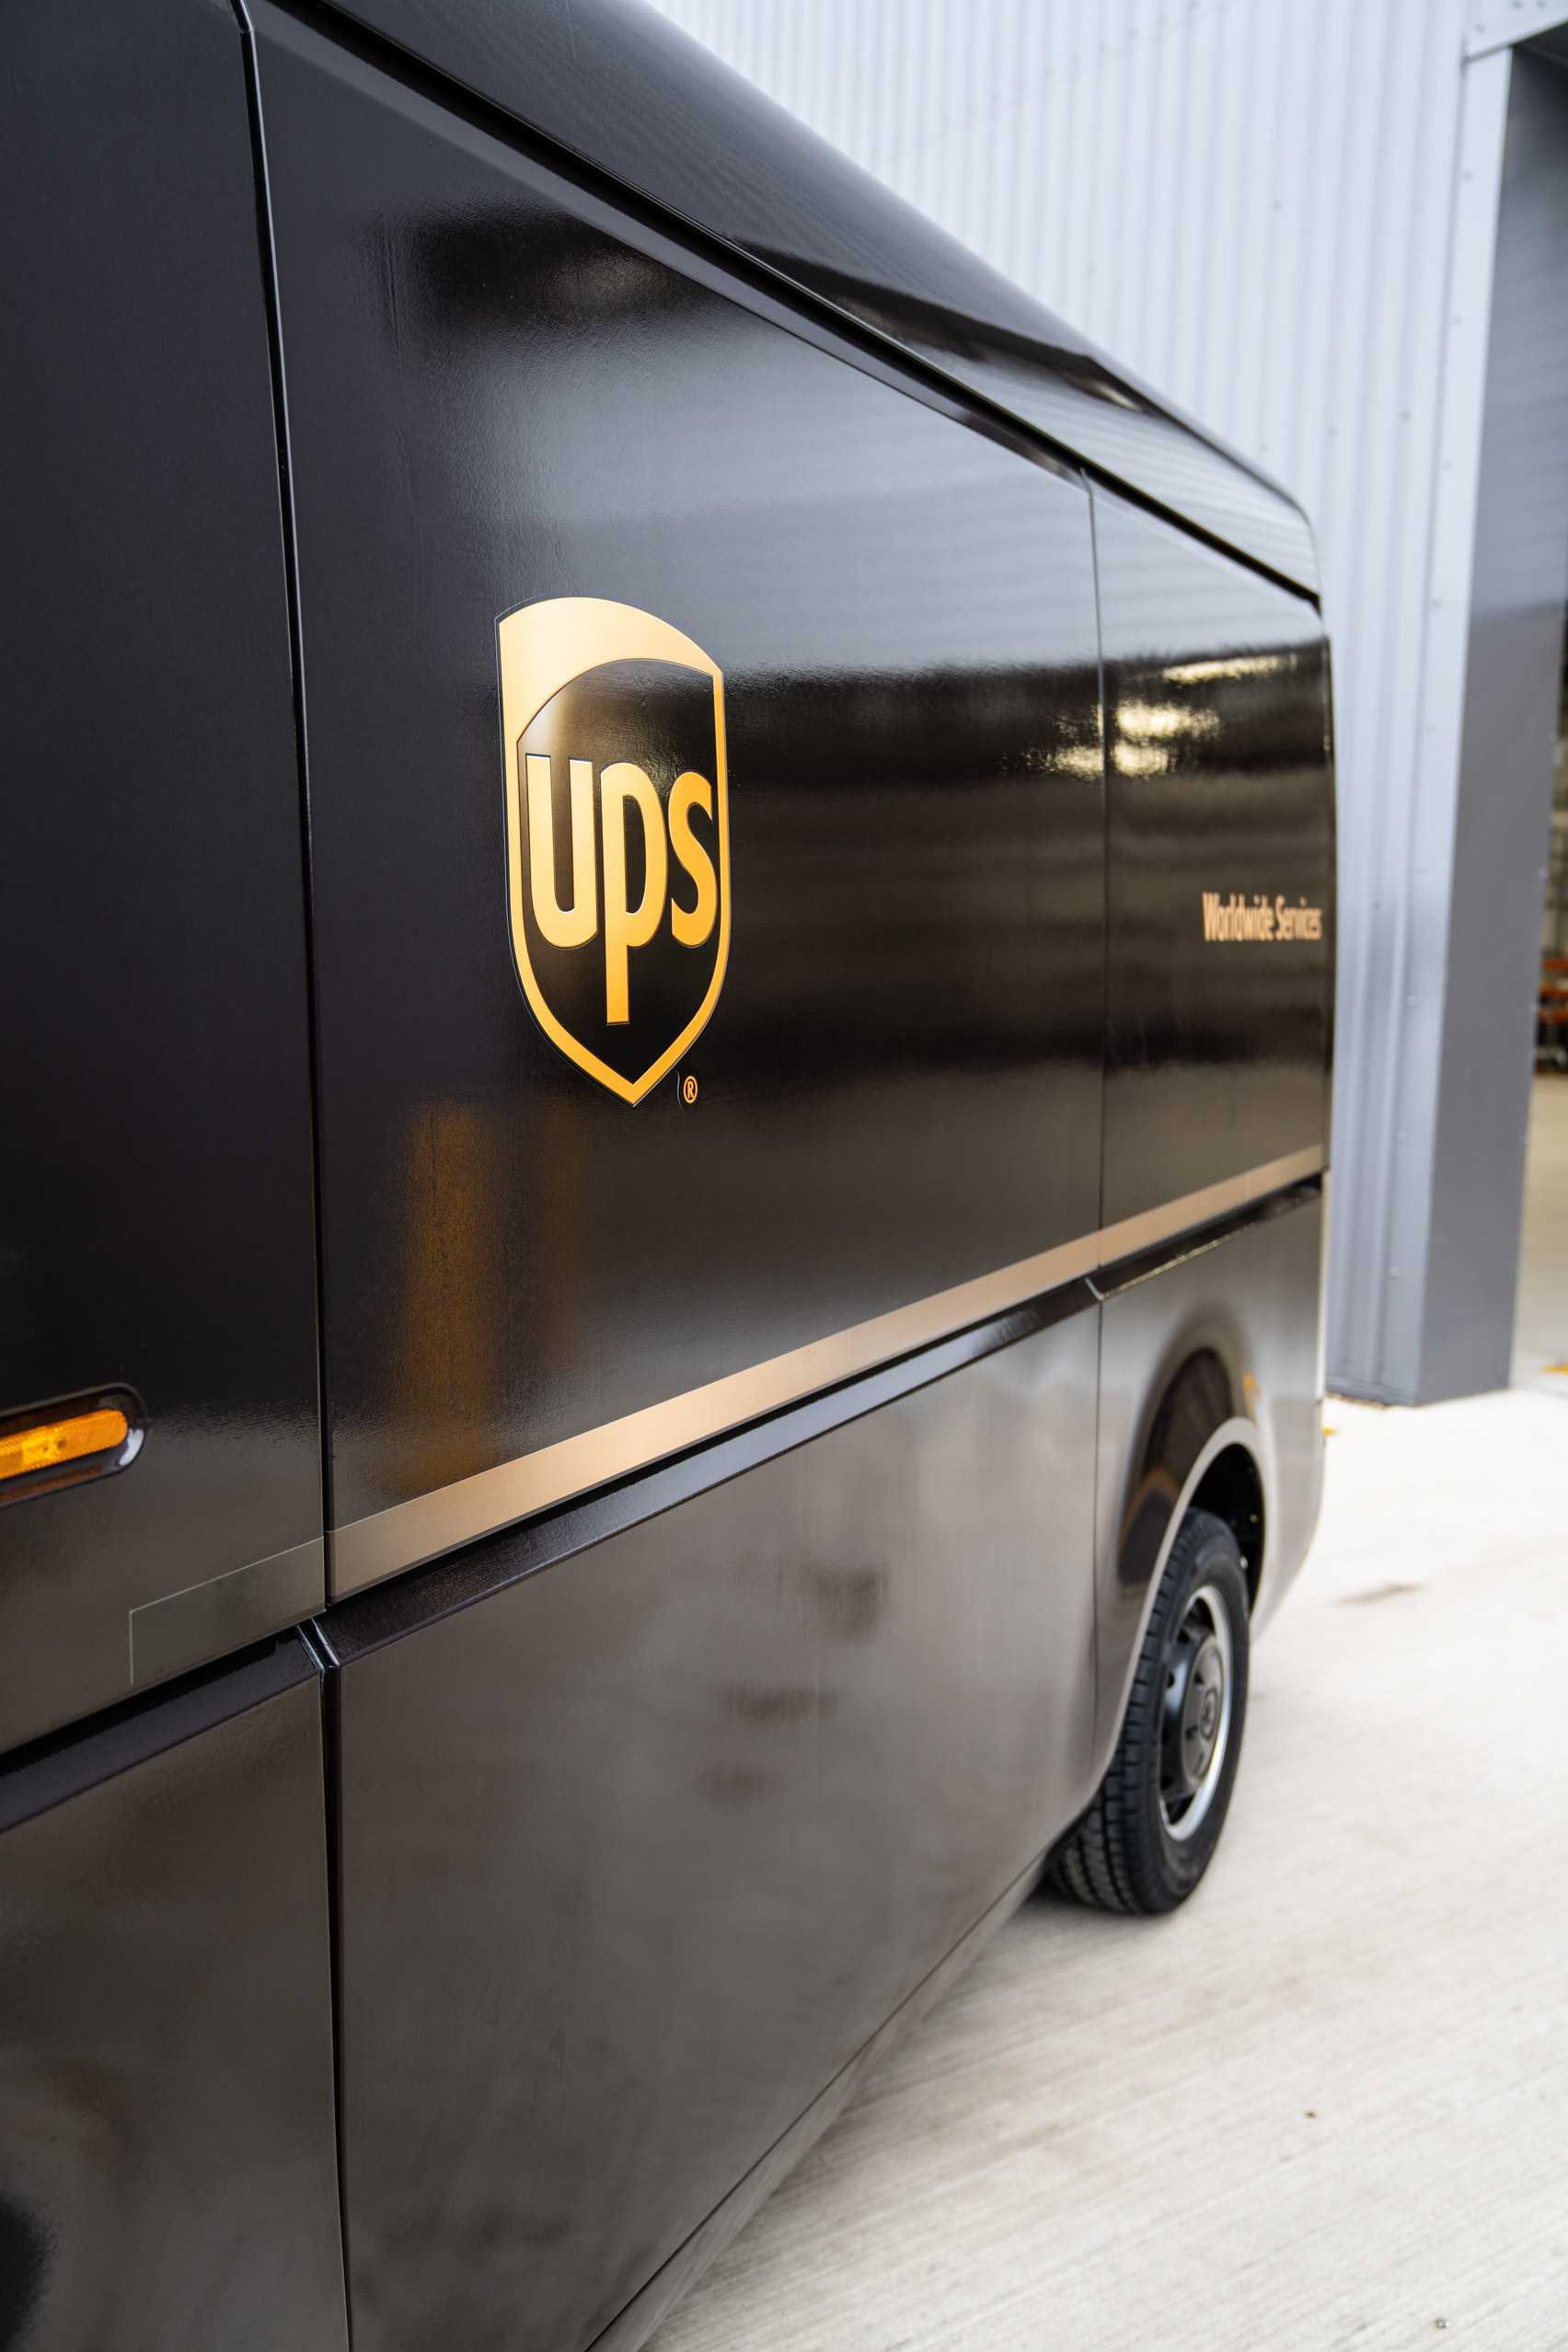 UPS vans by Arrival electric vehicles